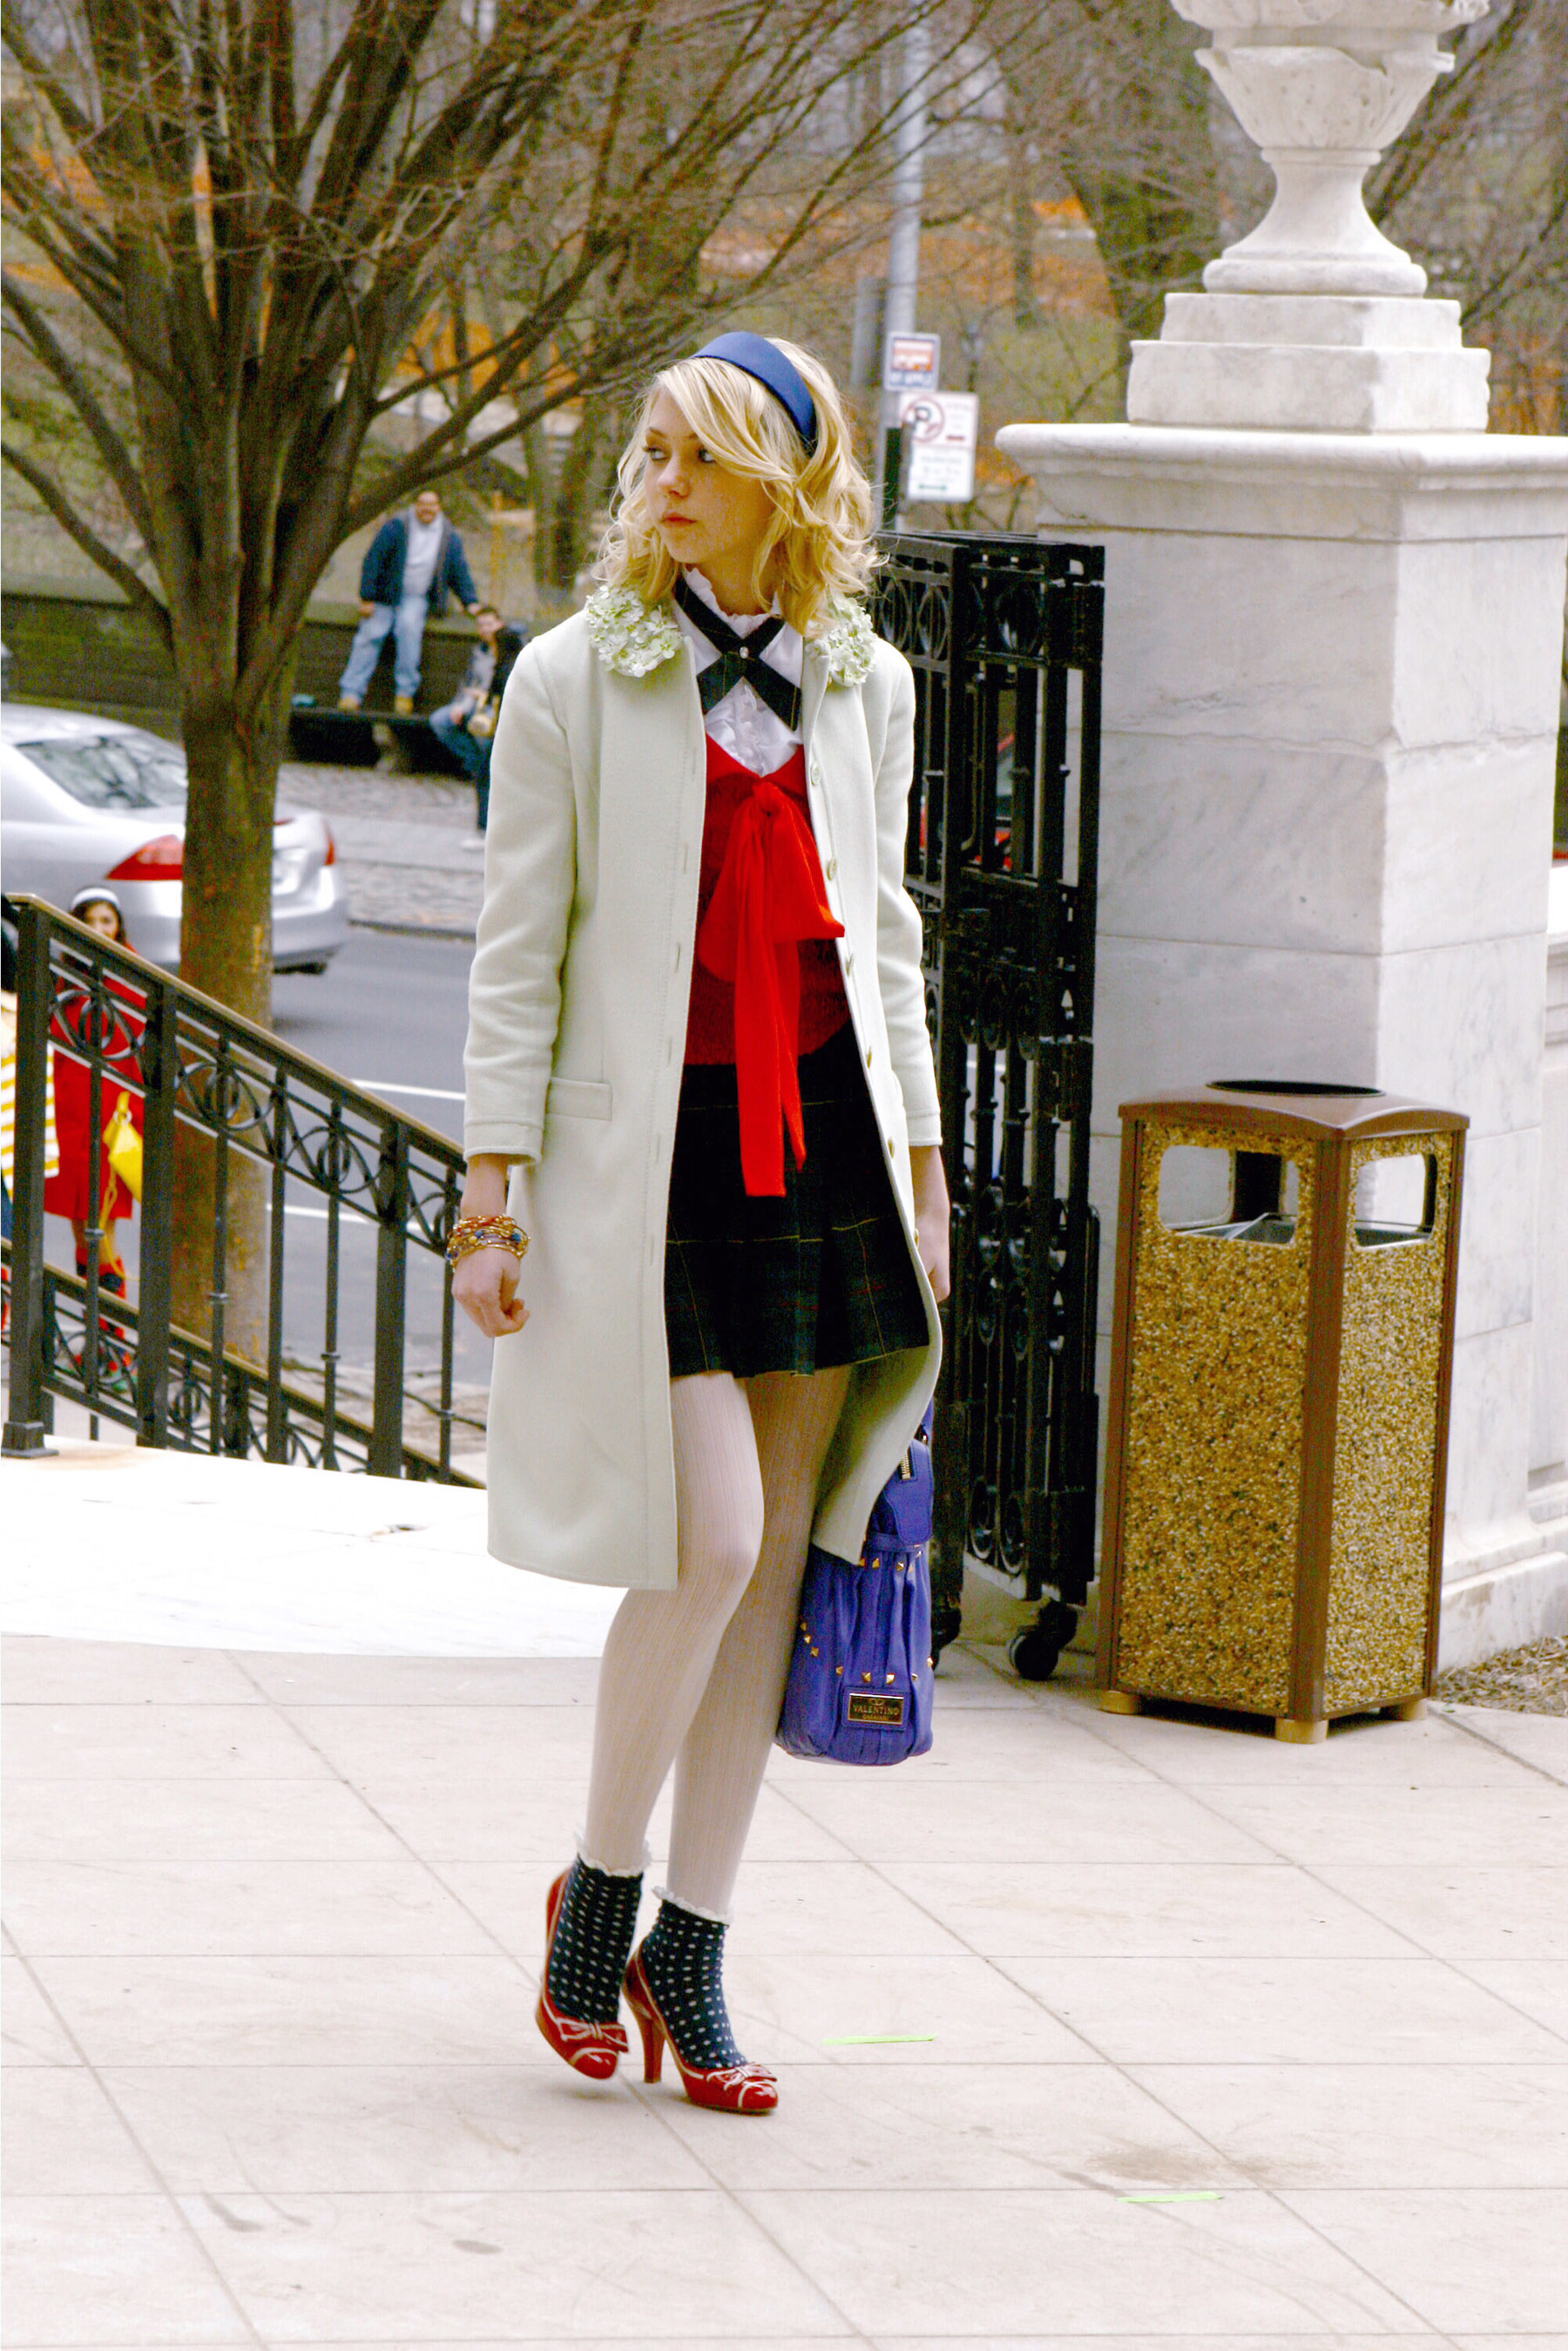 Taylor on the set of &quot;Gossip Girl&quot;